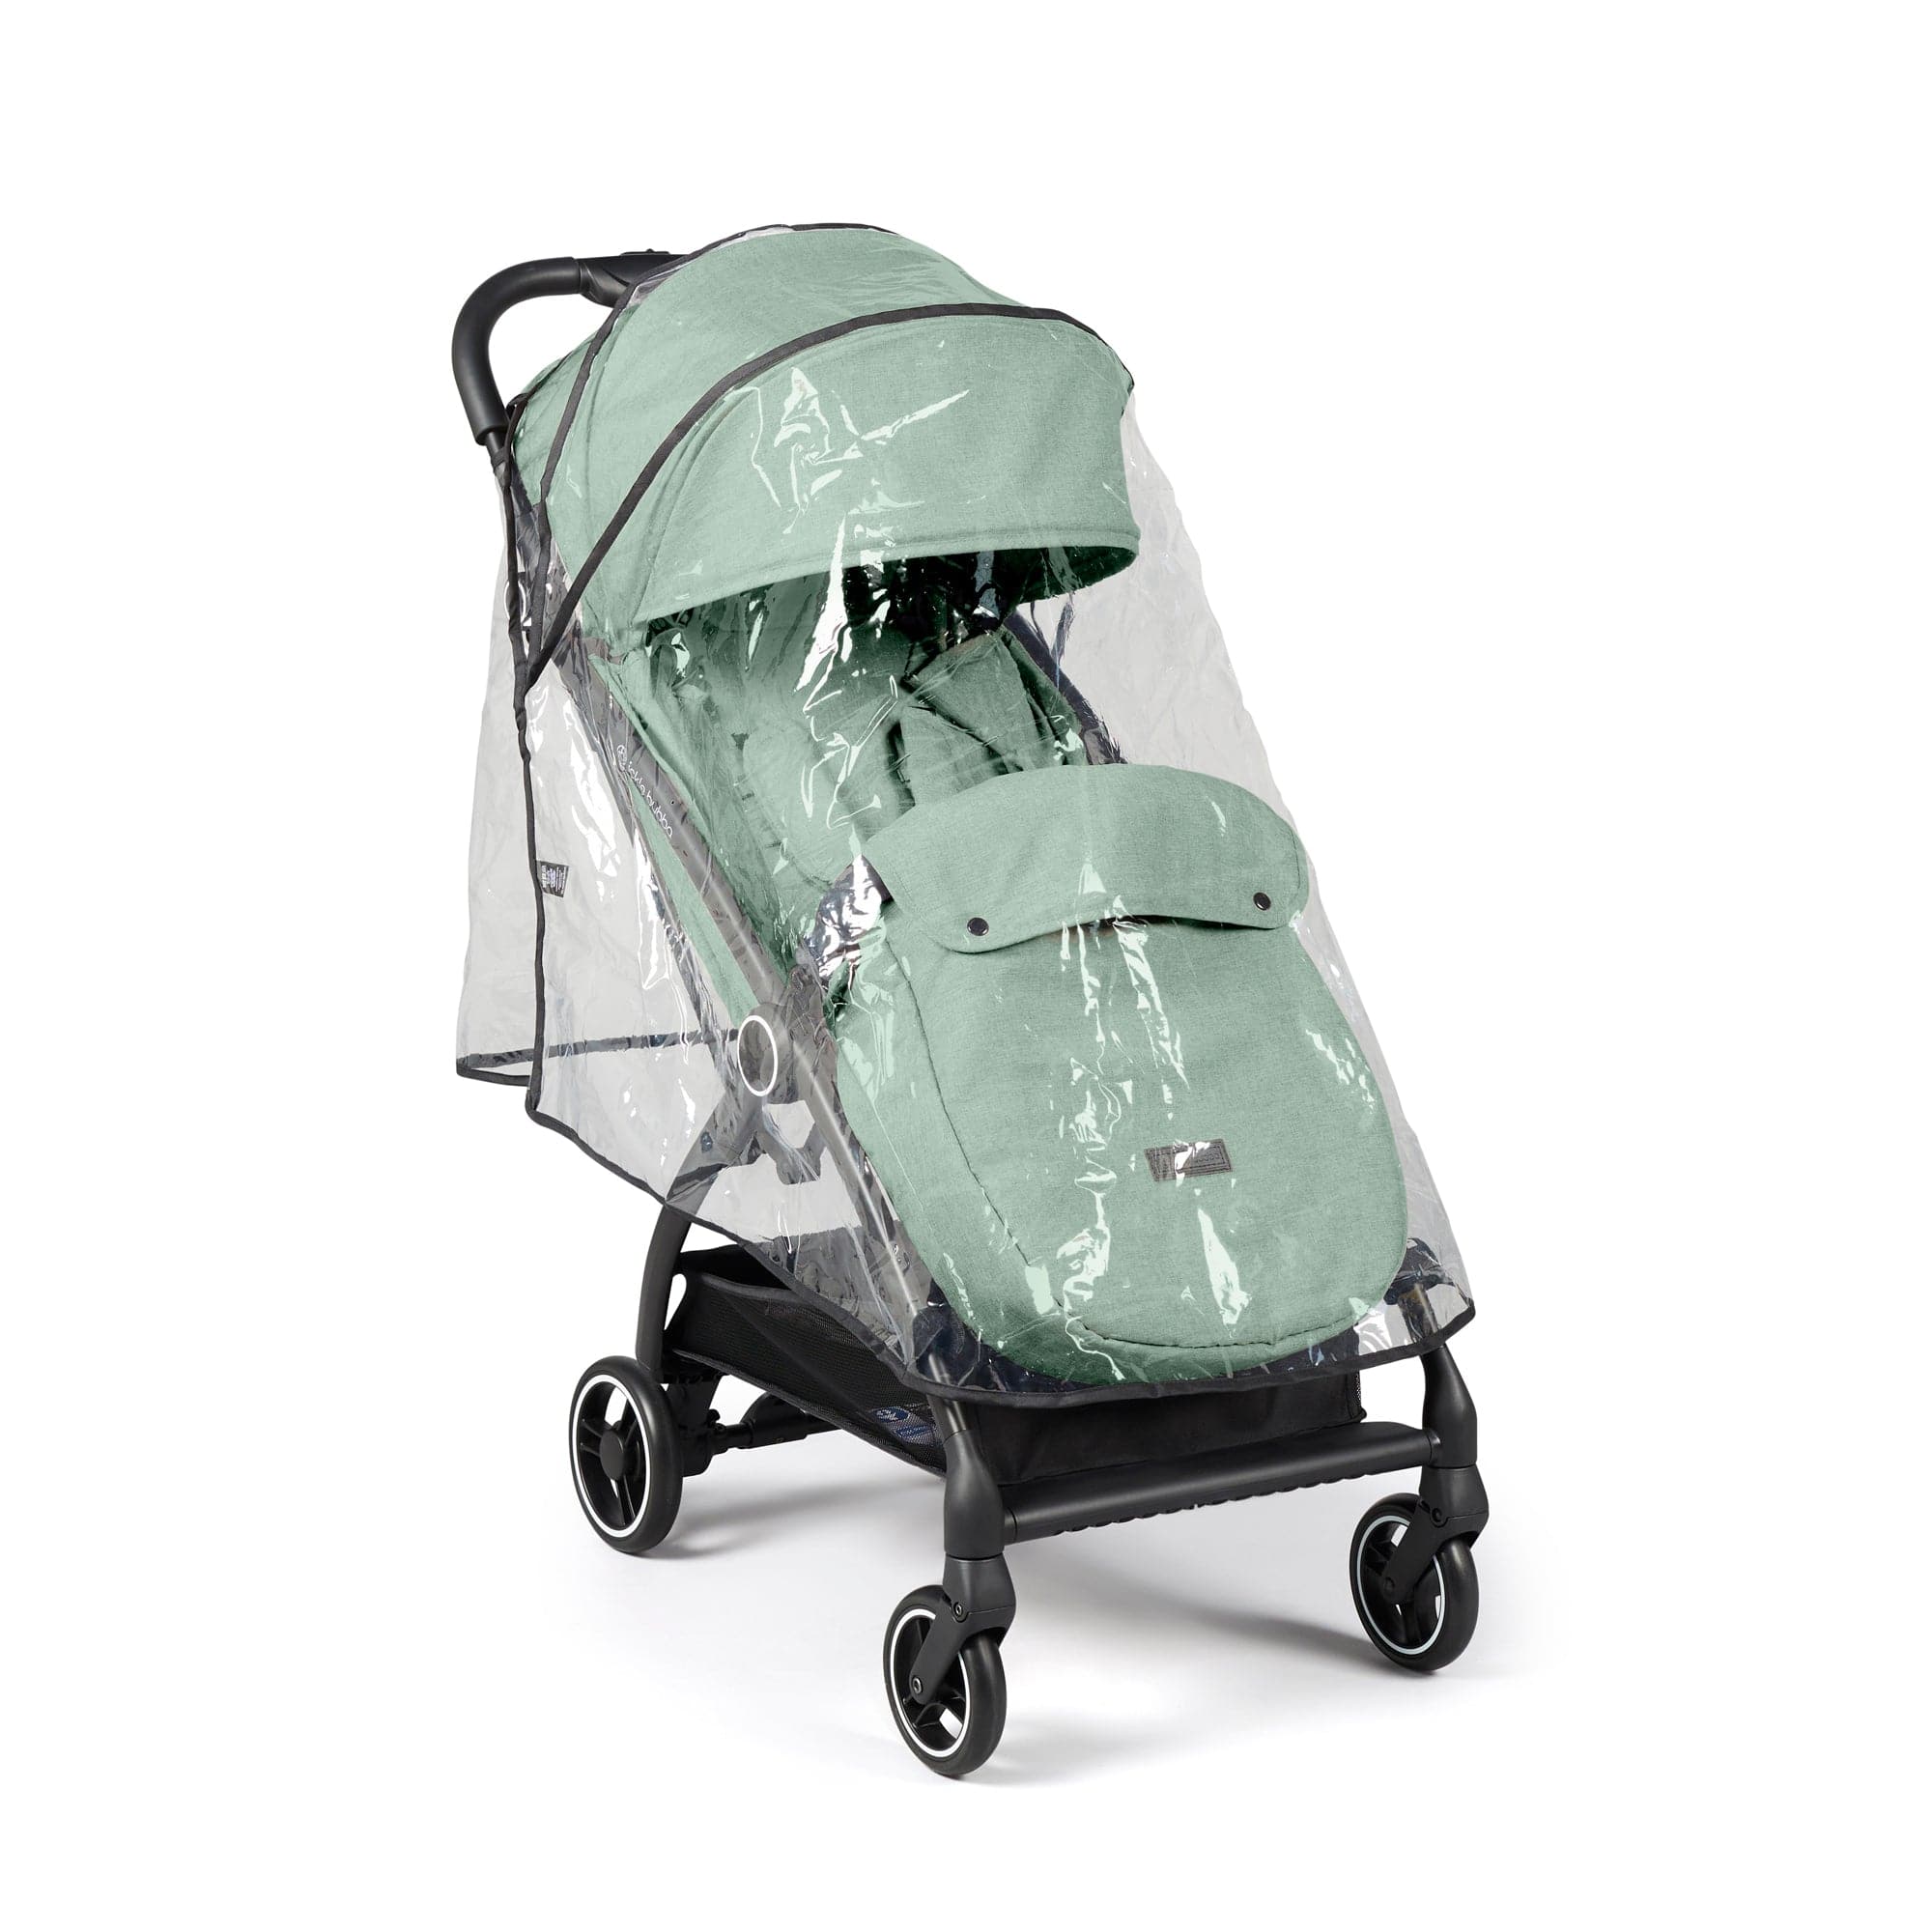 Ickle Bubba Aries Autofold Stroller in Sage Green Pushchairs & Buggies 15-005-100-152 5056515031249